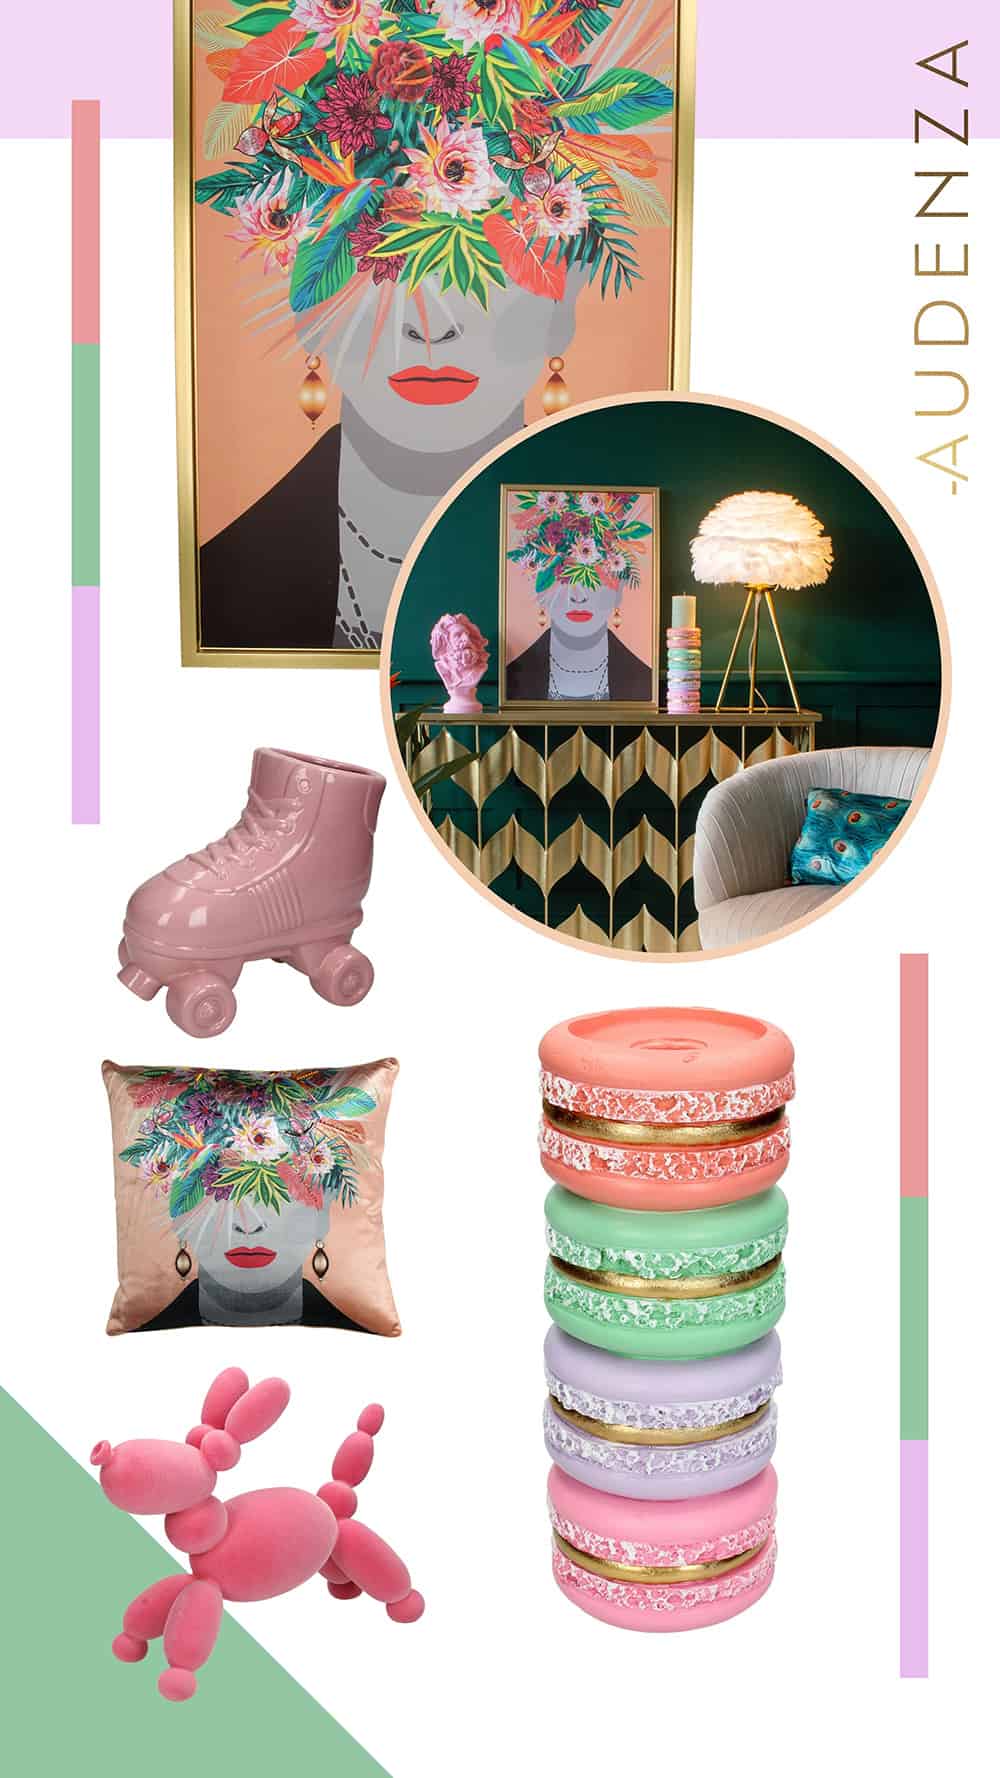 New kitsch homewares in gorgeous pastel colours. From candleholders in flocked pink, pastel macaron candle holders, to the ever popular Frida Kahlo style design on cushions and prints.